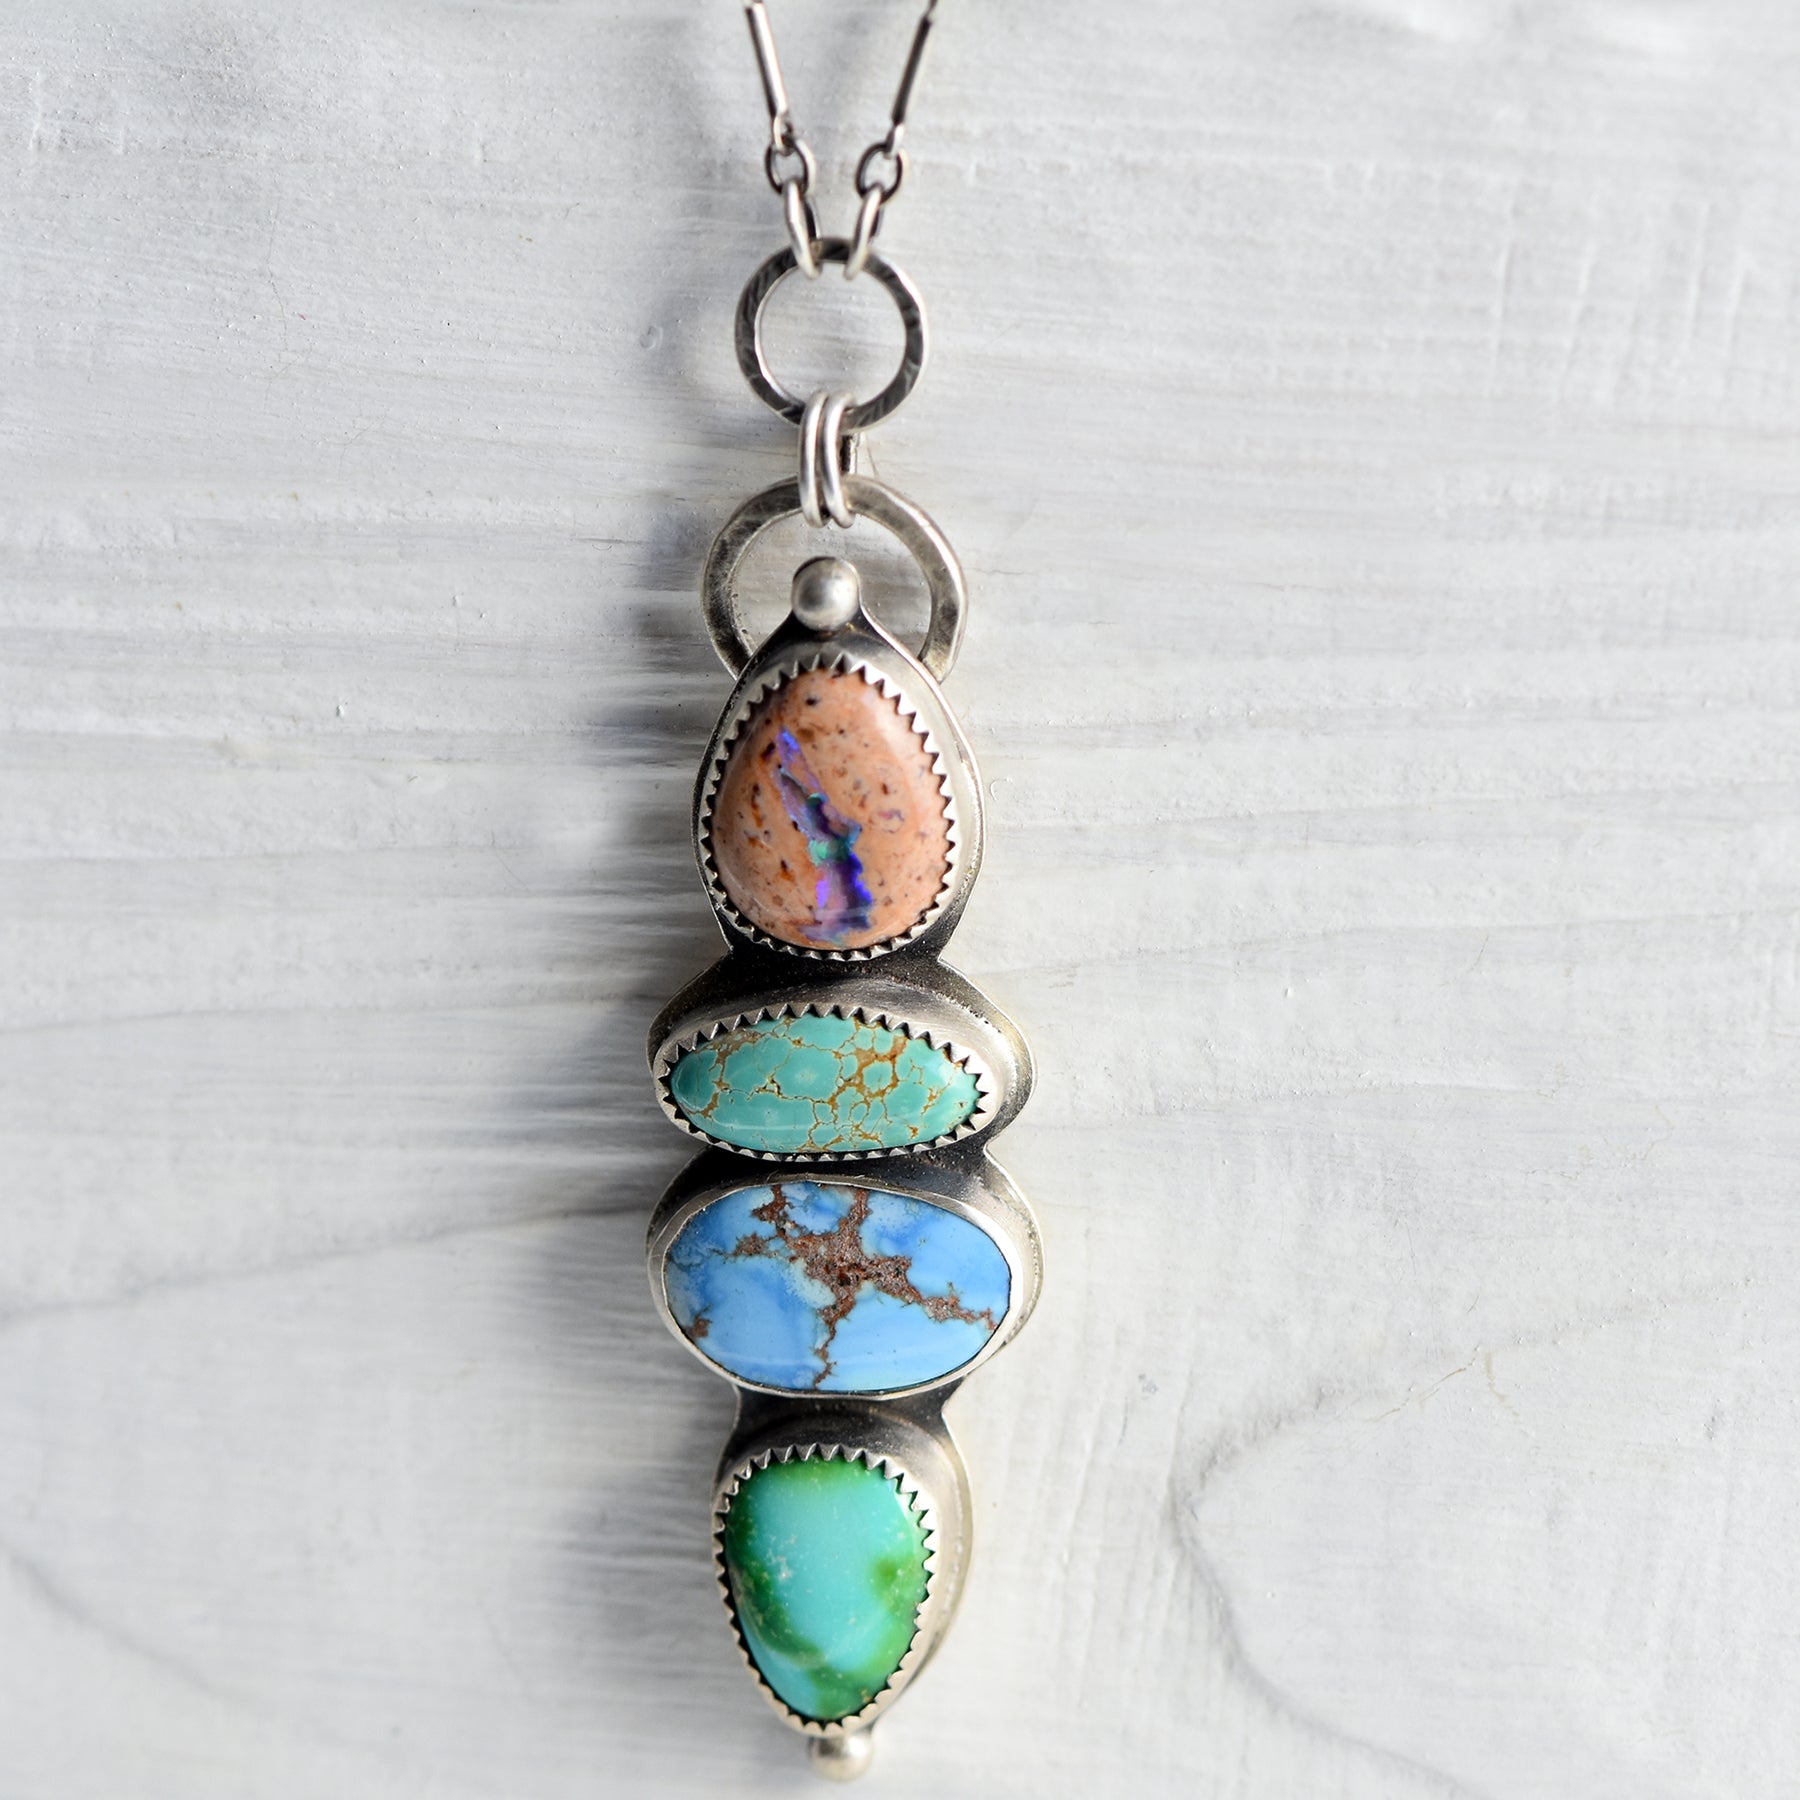 Stone Collector Necklace with Turquoise & Mexican Fire Opal